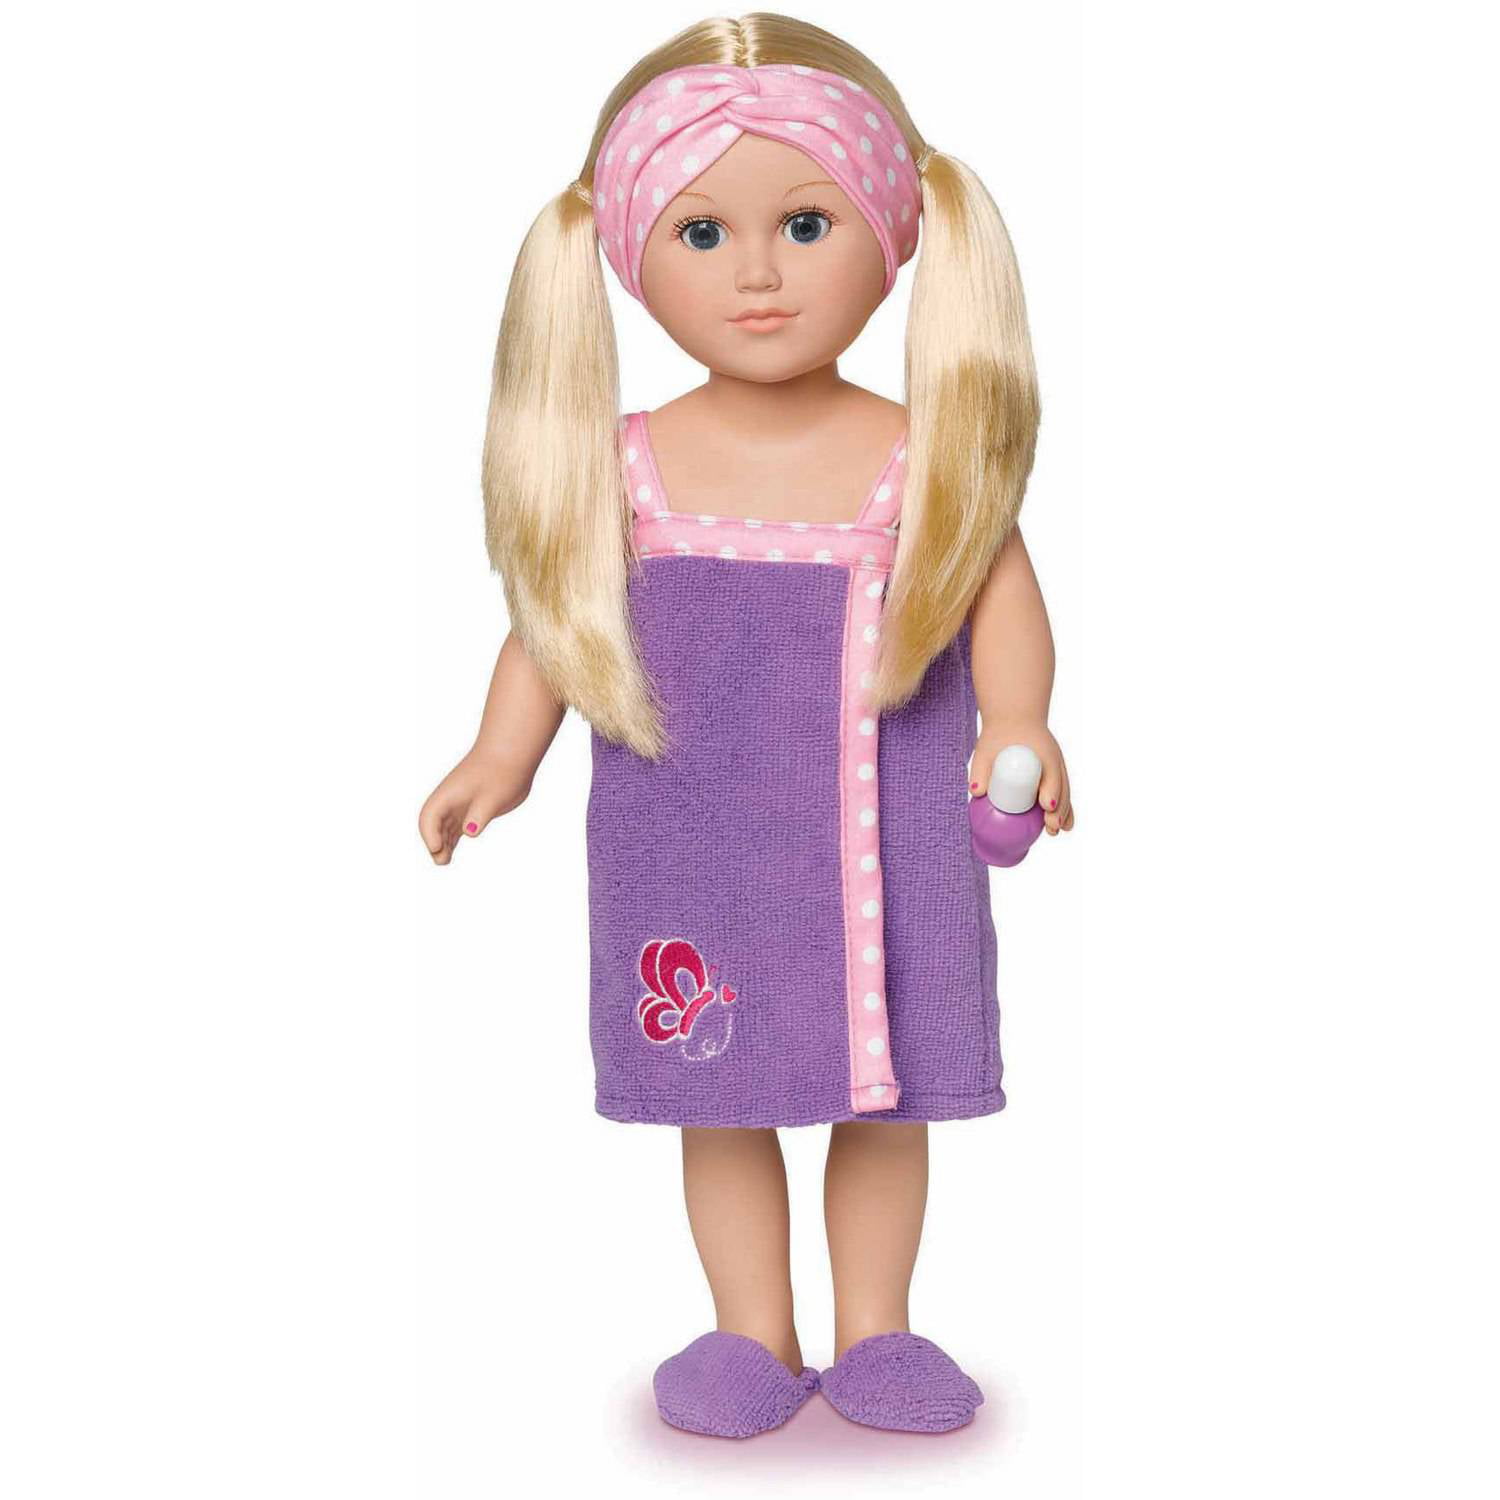 My Life As 18 Spa Vacationer Doll Blonde Hair With A Soft Torso 